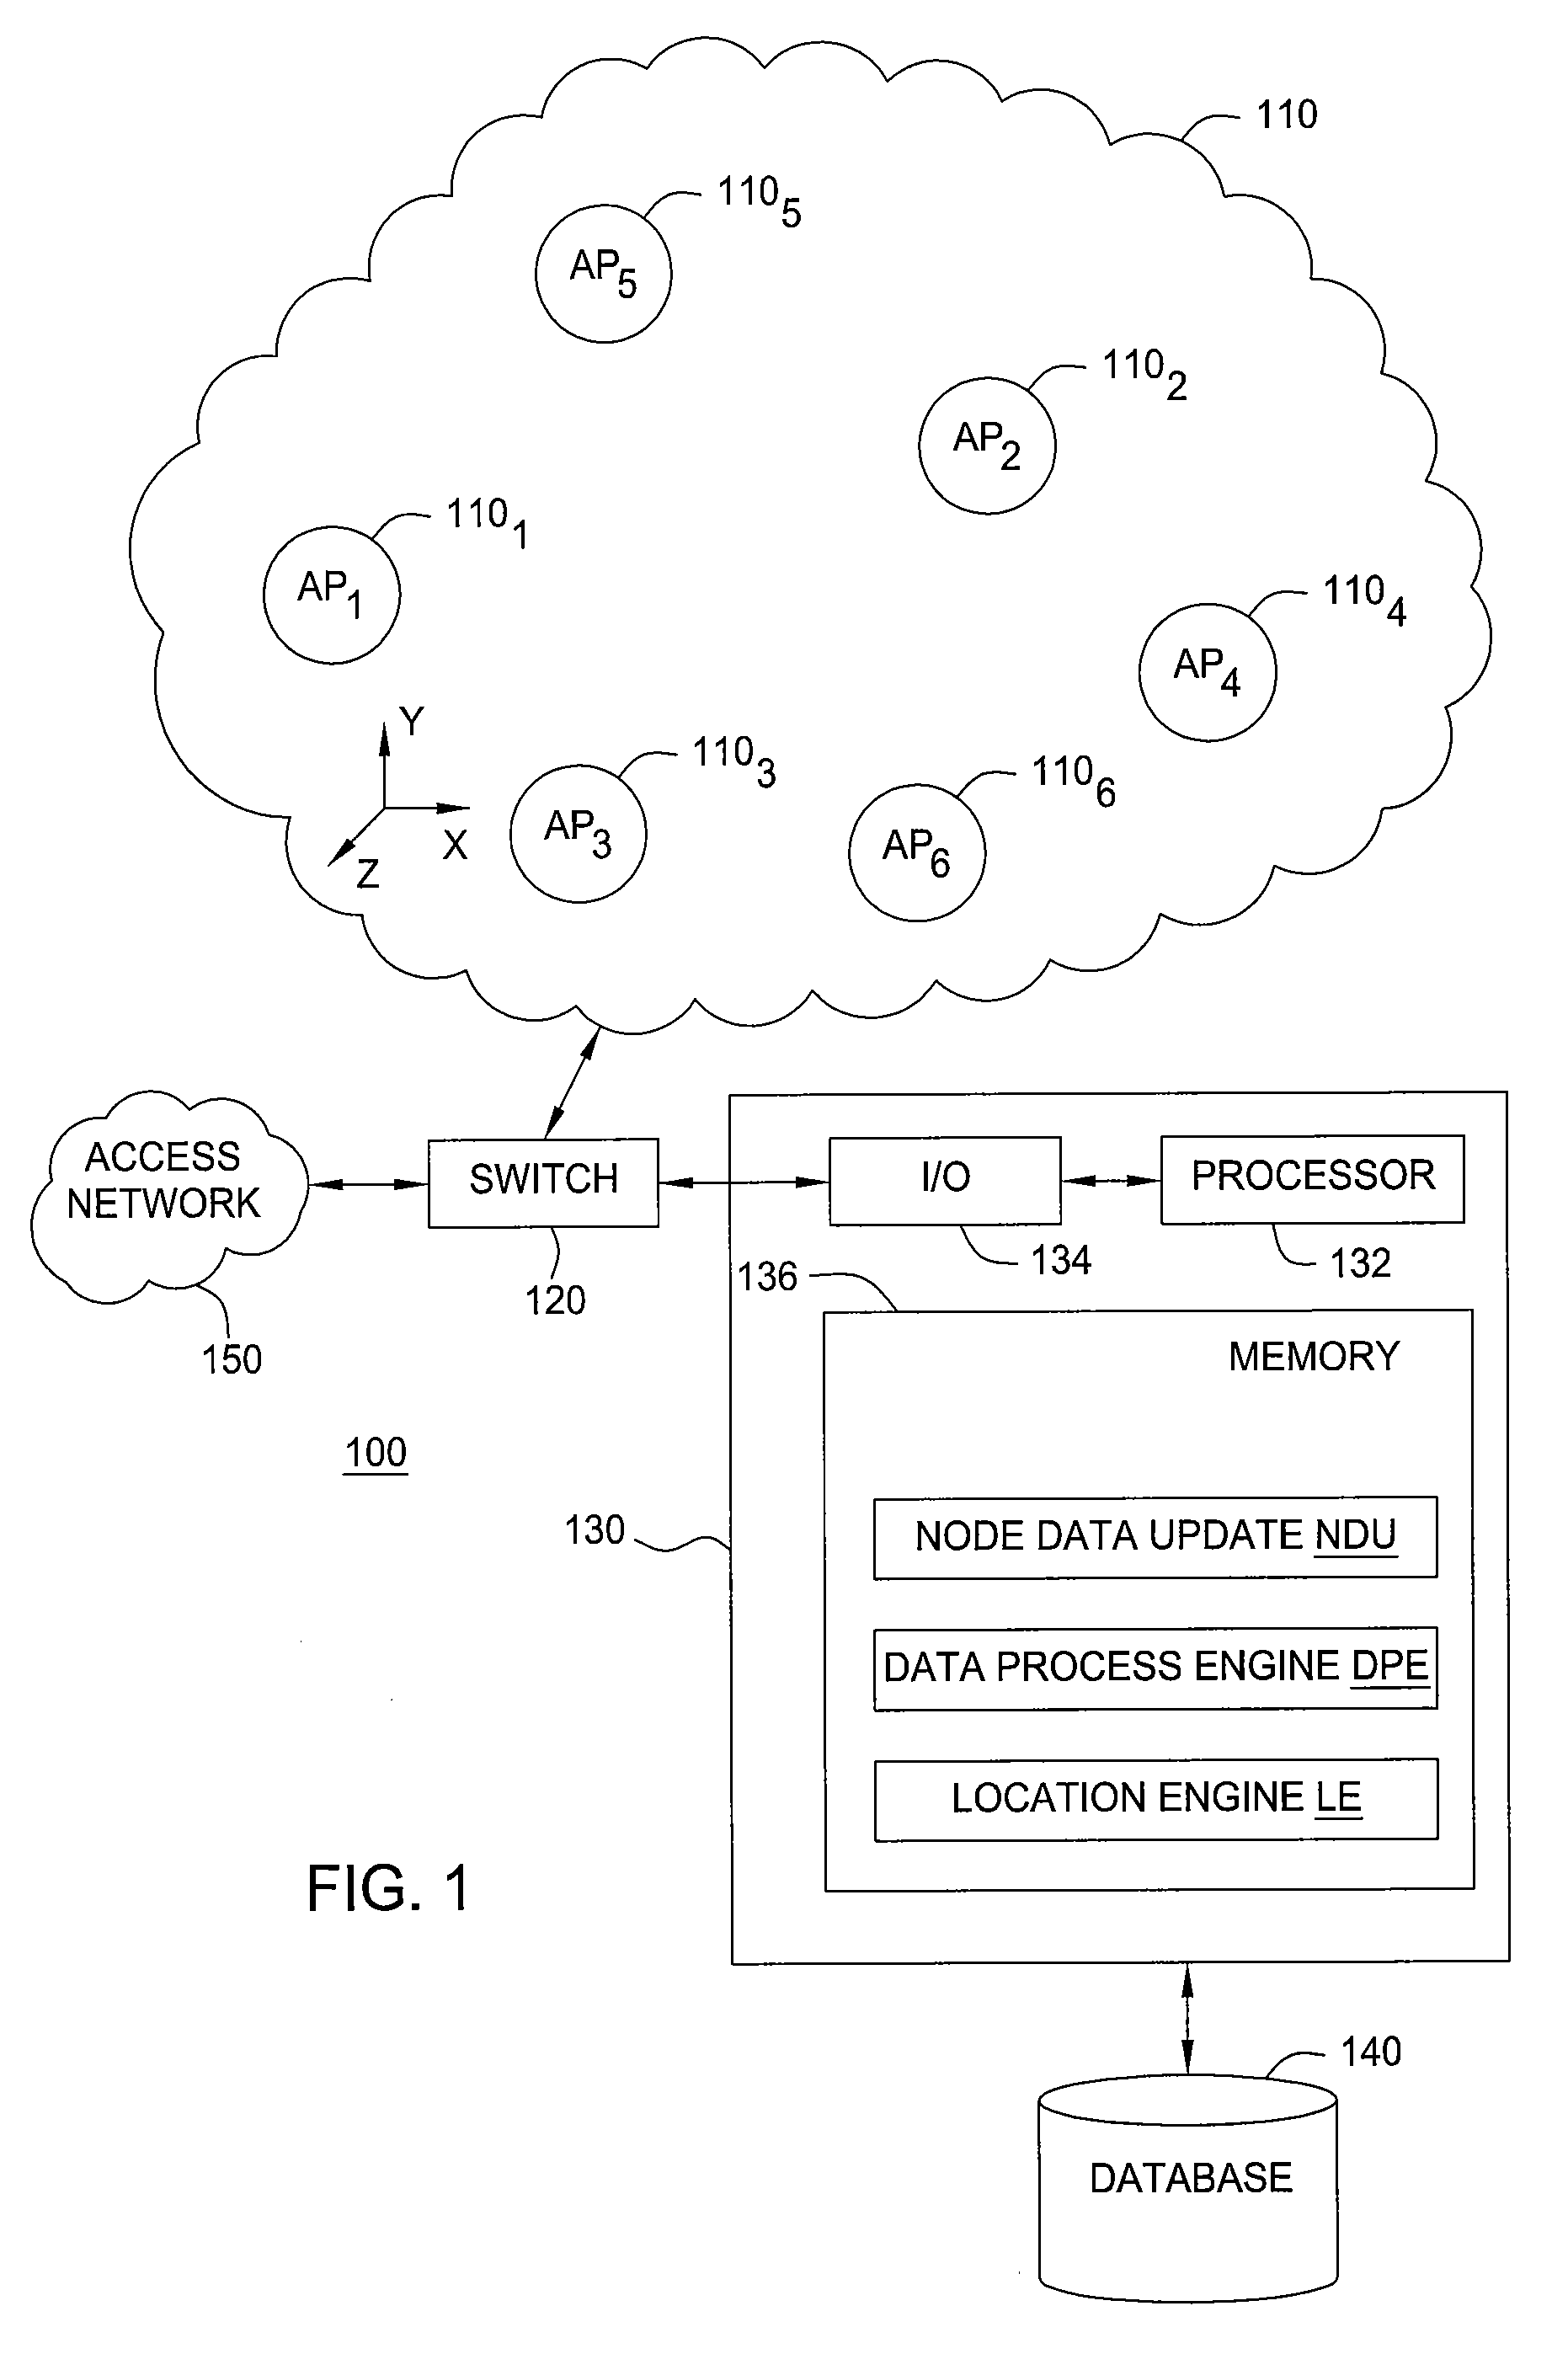 Detection of access point location errors in enterprise localization systems